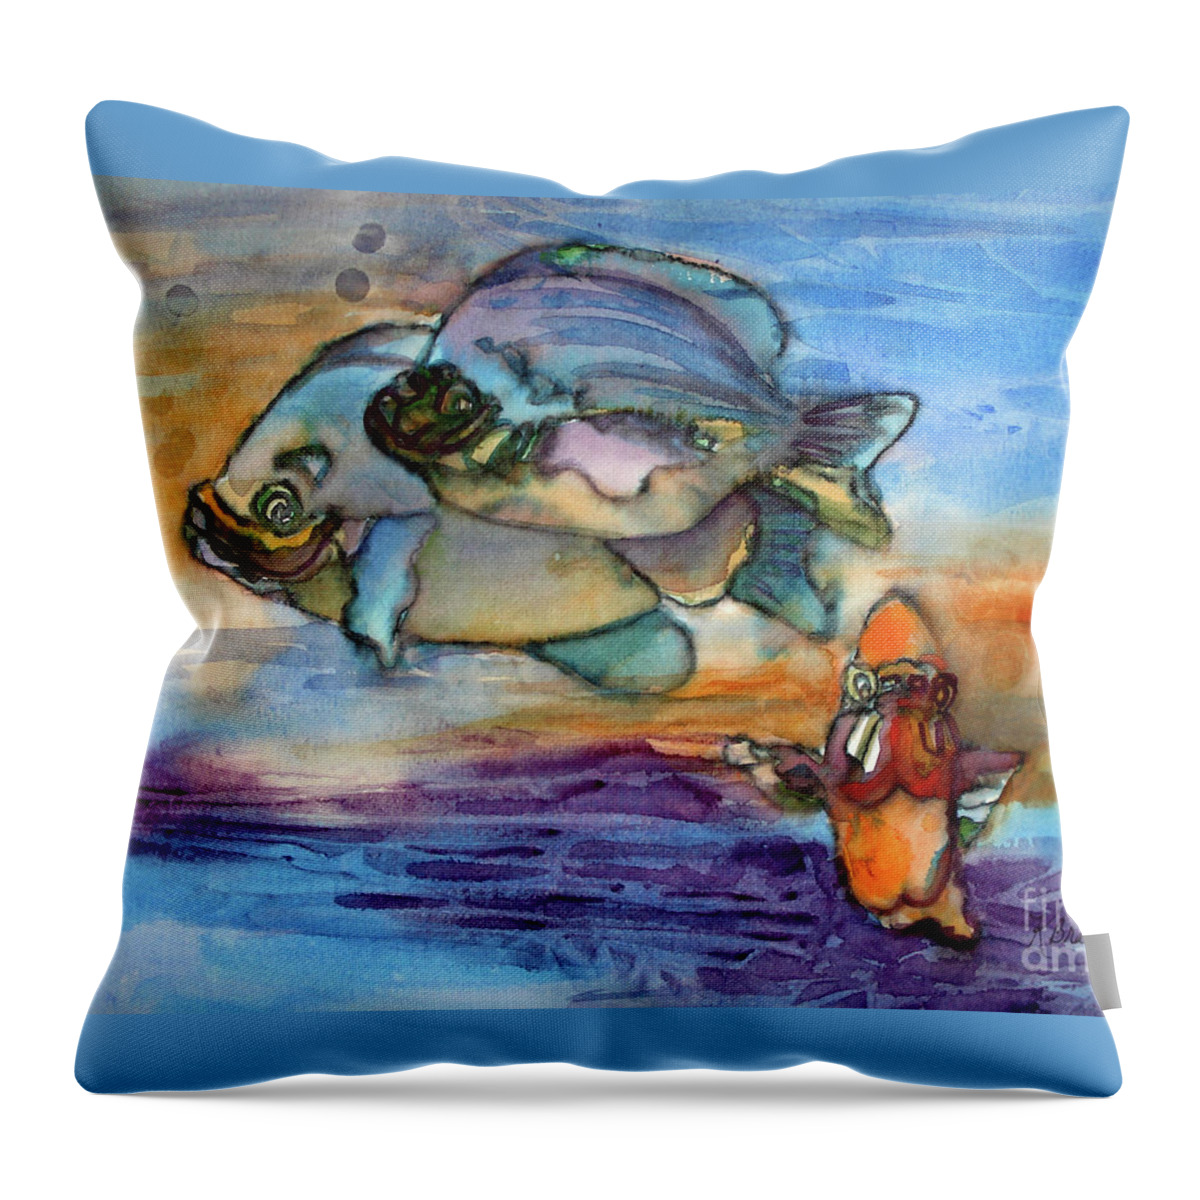 Joyful Throw Pillow featuring the painting Fish - Light Rays of Color by Kathy Braud